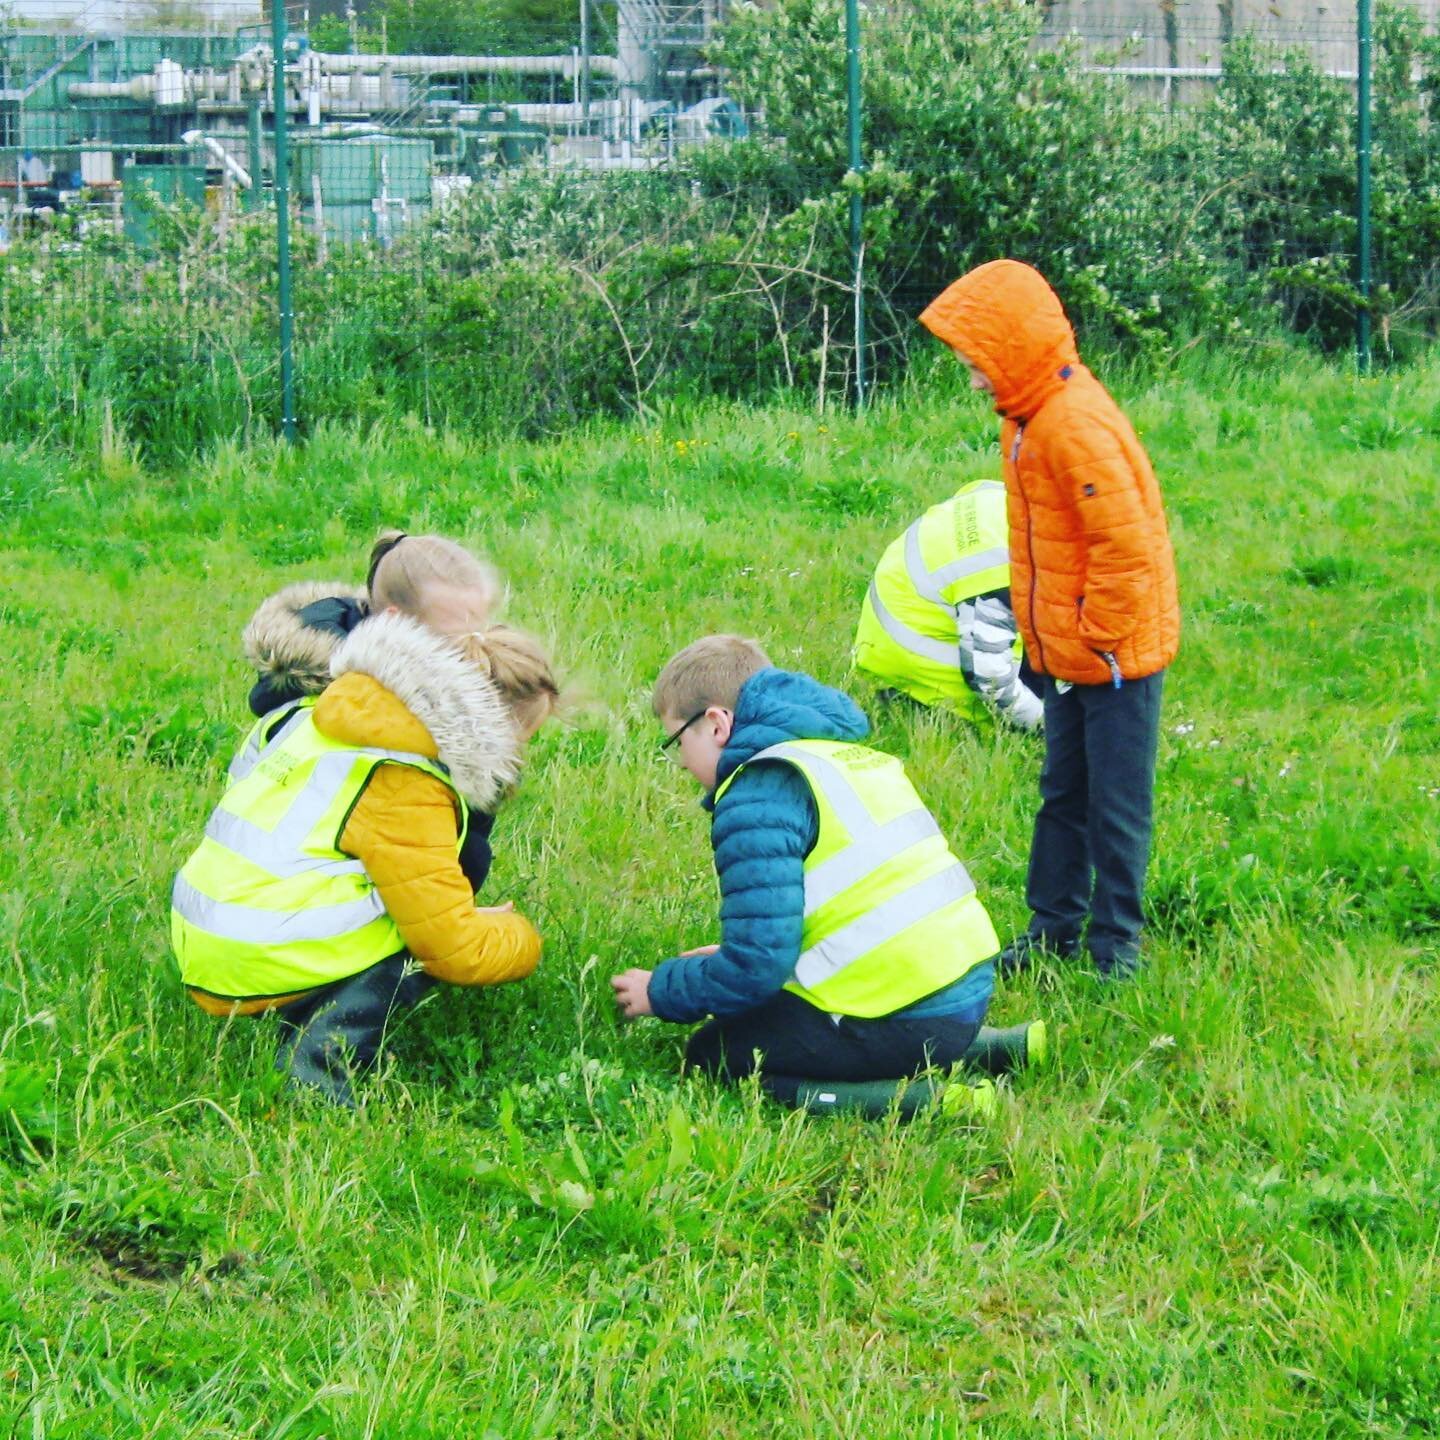 On Friday we took our first school visit to a solar farm for such a very long time! It was a bit windy and a bit rainy but everyone had an amazing time exploring how solar farms generate electricity AND how solar farm sites can be managed to improve 